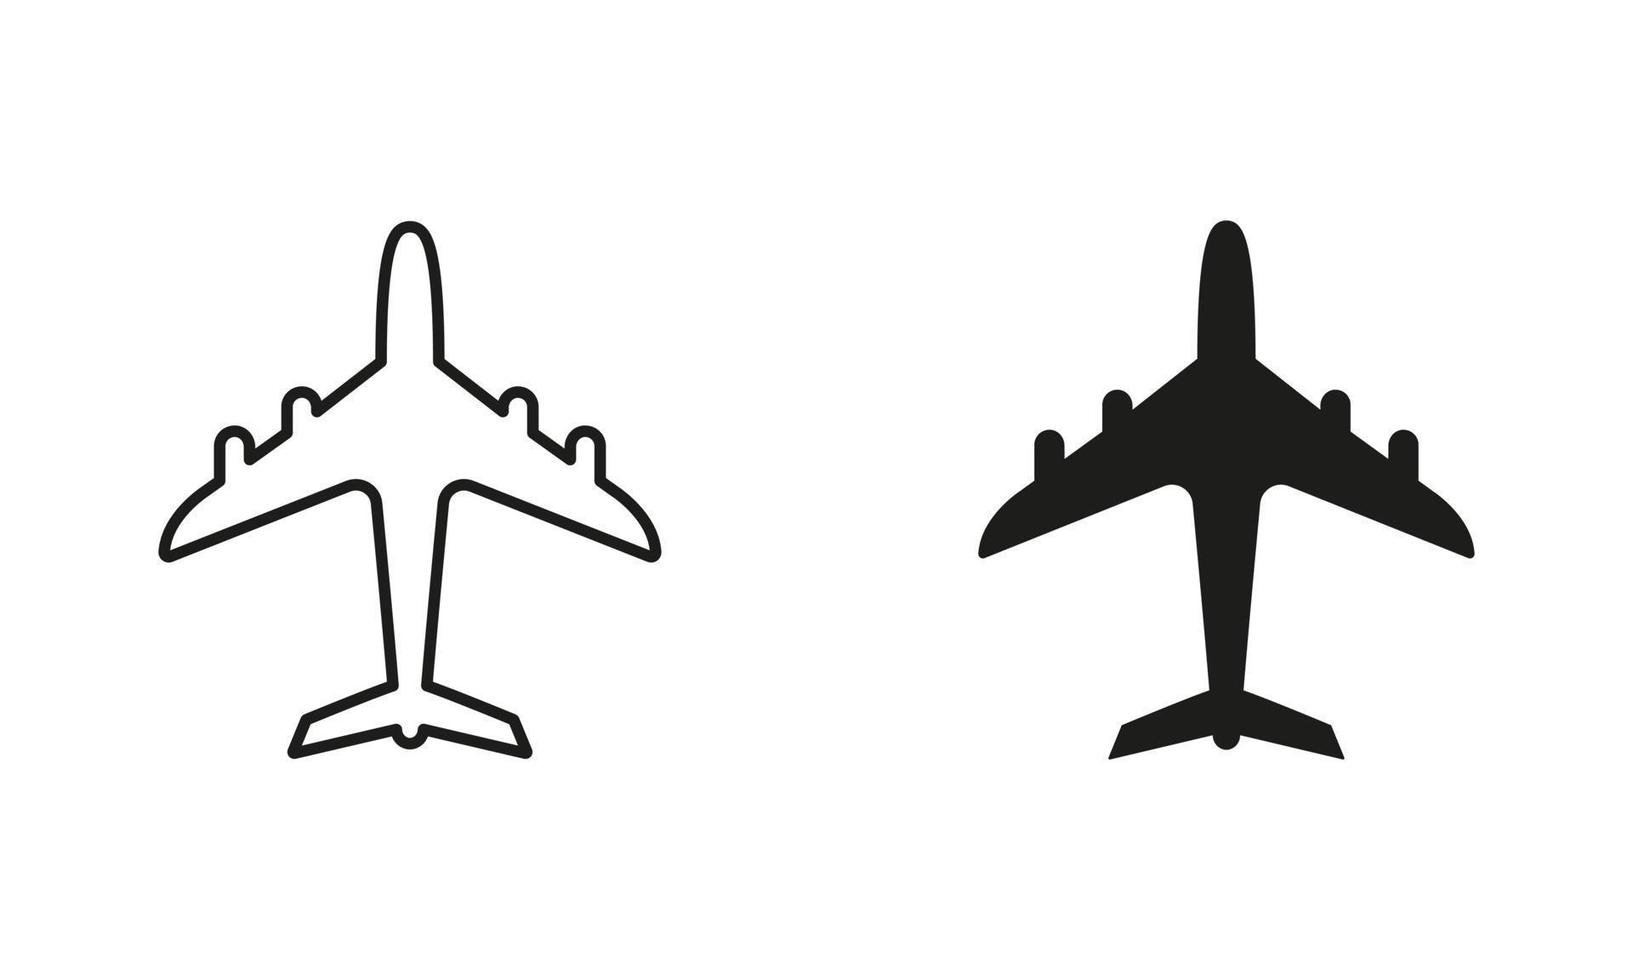 Airplane Line and Silhouette Black Icon Set. Aviation Jet, Air Plane Pictogram. Travel Tourism by Aircraft Outline and Solid Symbol Collection on White Background. Isolated Vector Illustration.